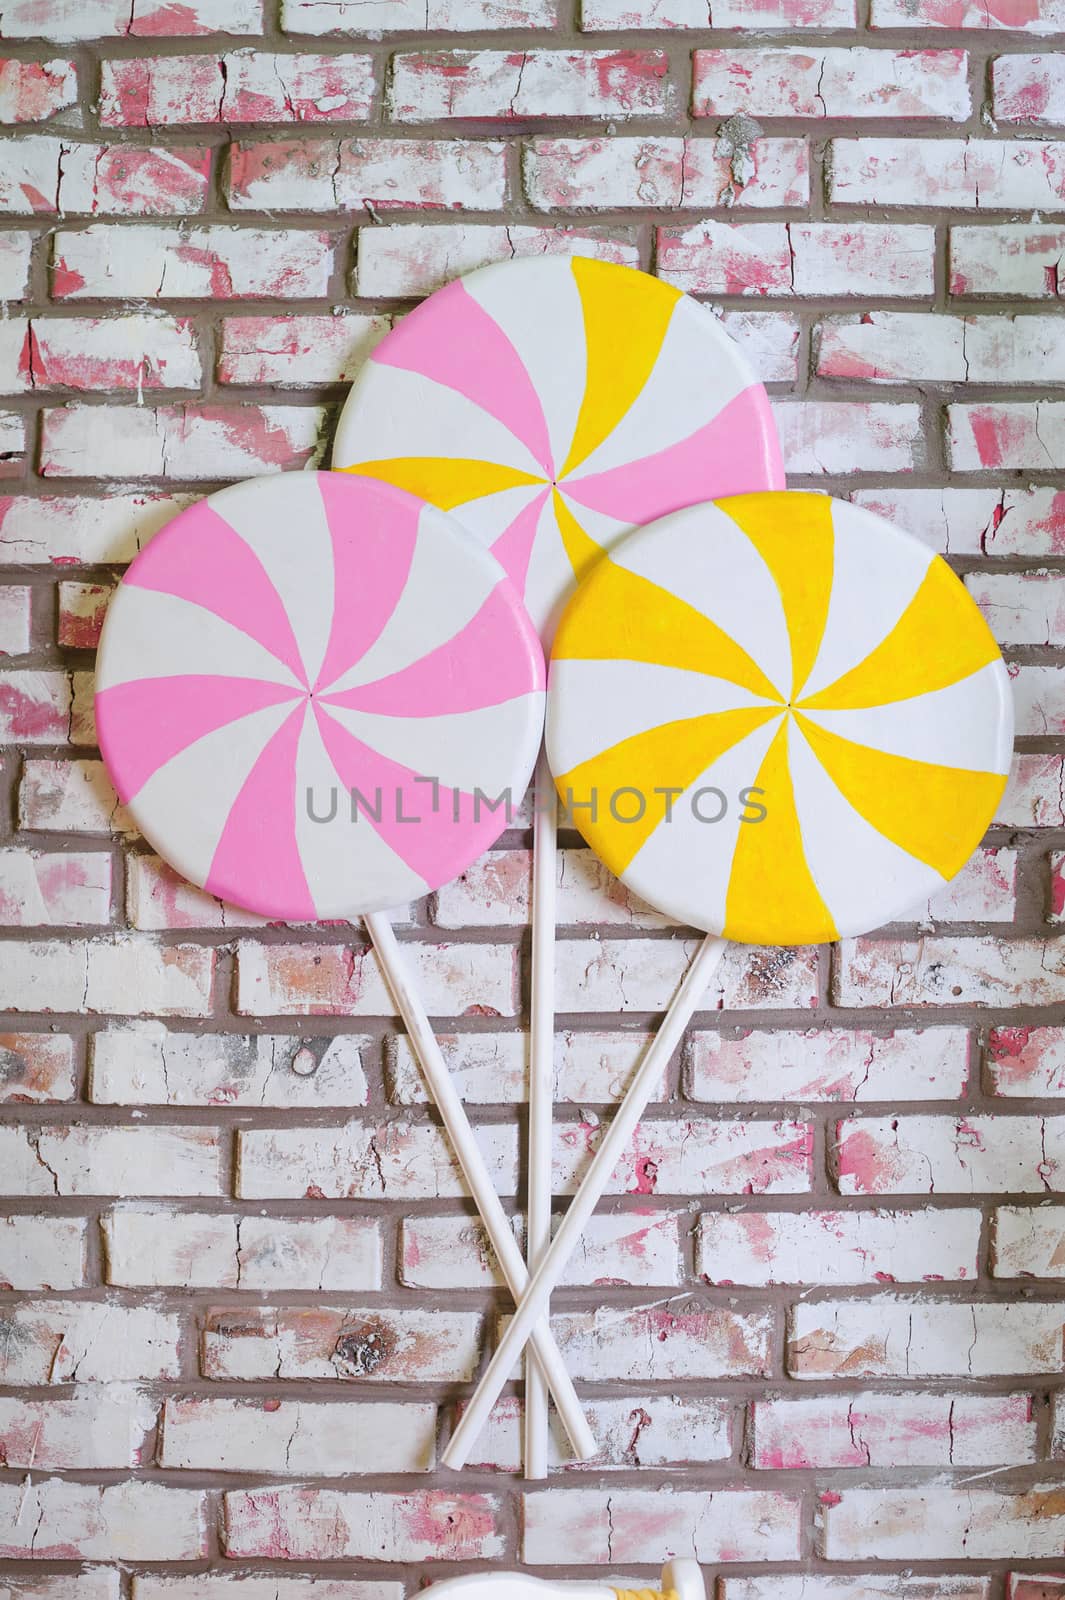 multi-colored lollypops at the brick wall background by timonko